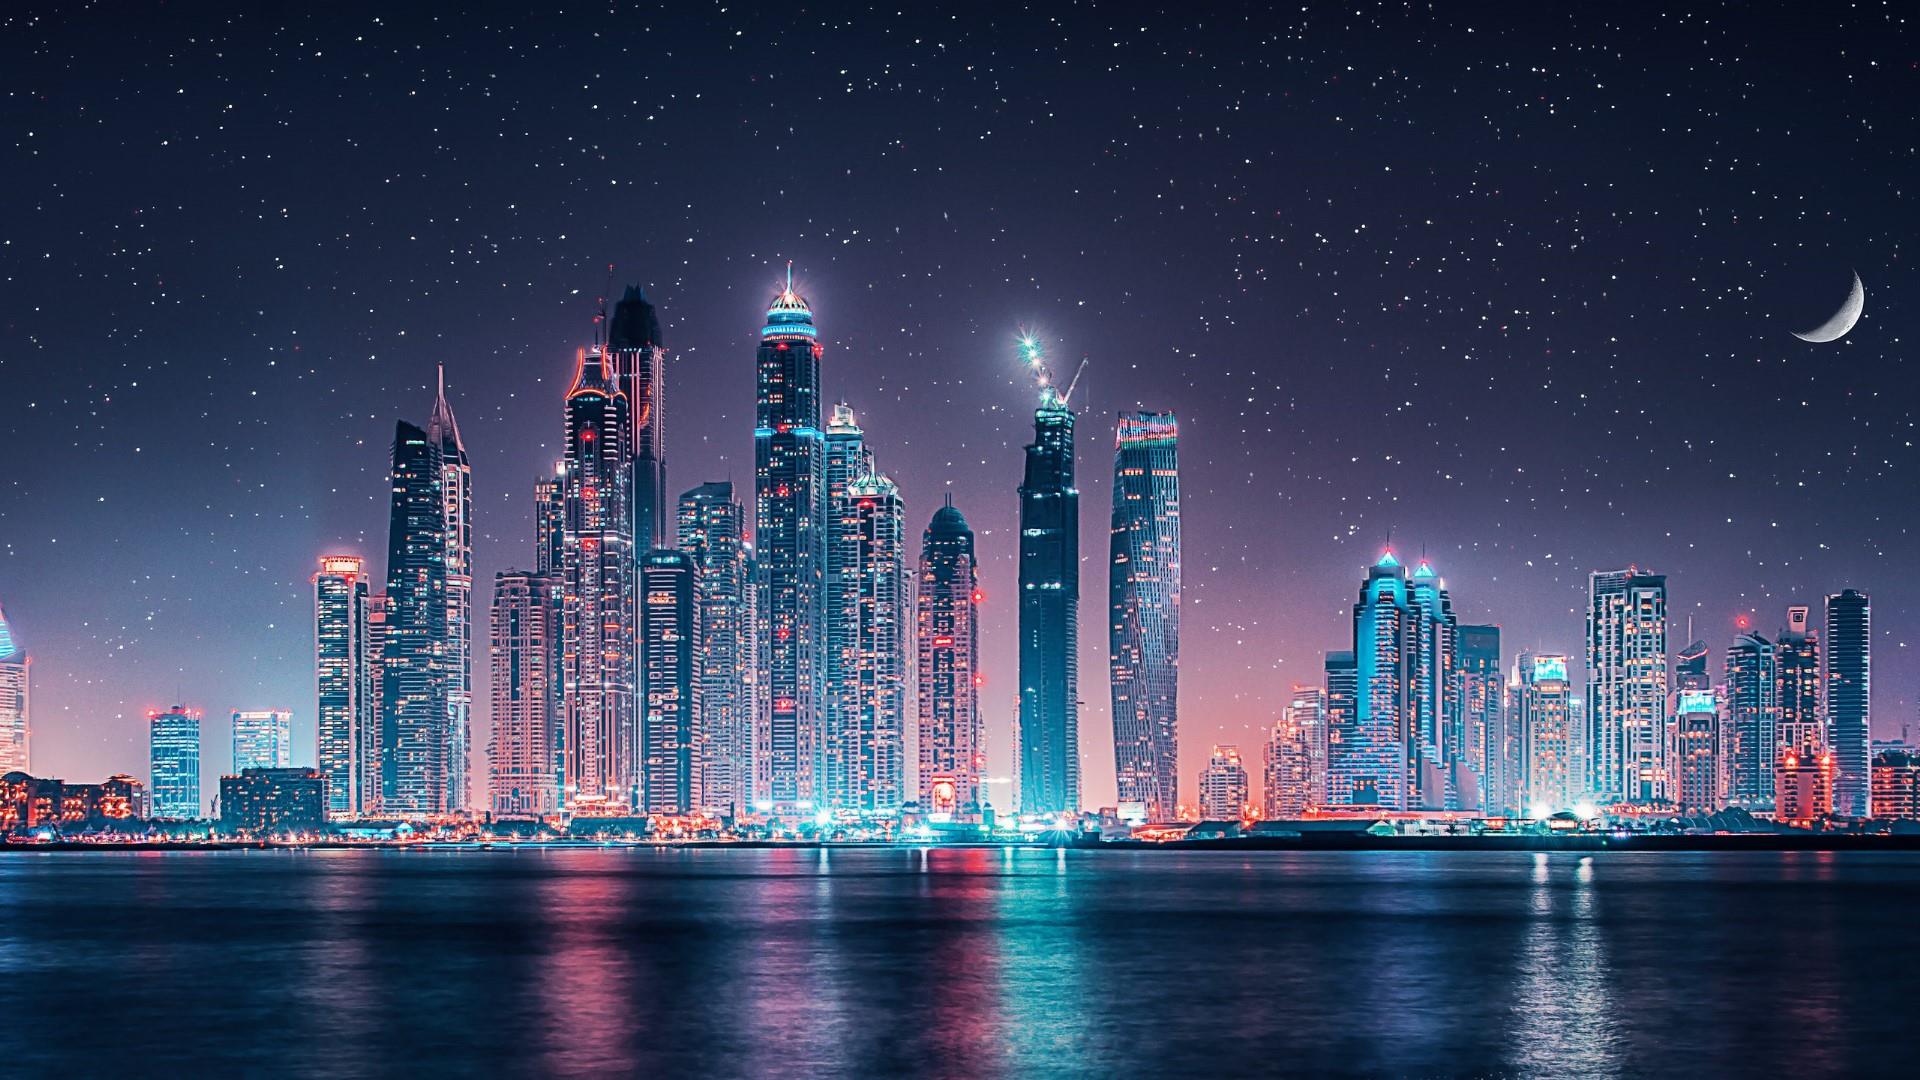 Dubai Skyline Starry Sky At Night Ultra Hd Wallpapers For Android Mobile  Phones Tablet And Laptop 1920x1080 : 